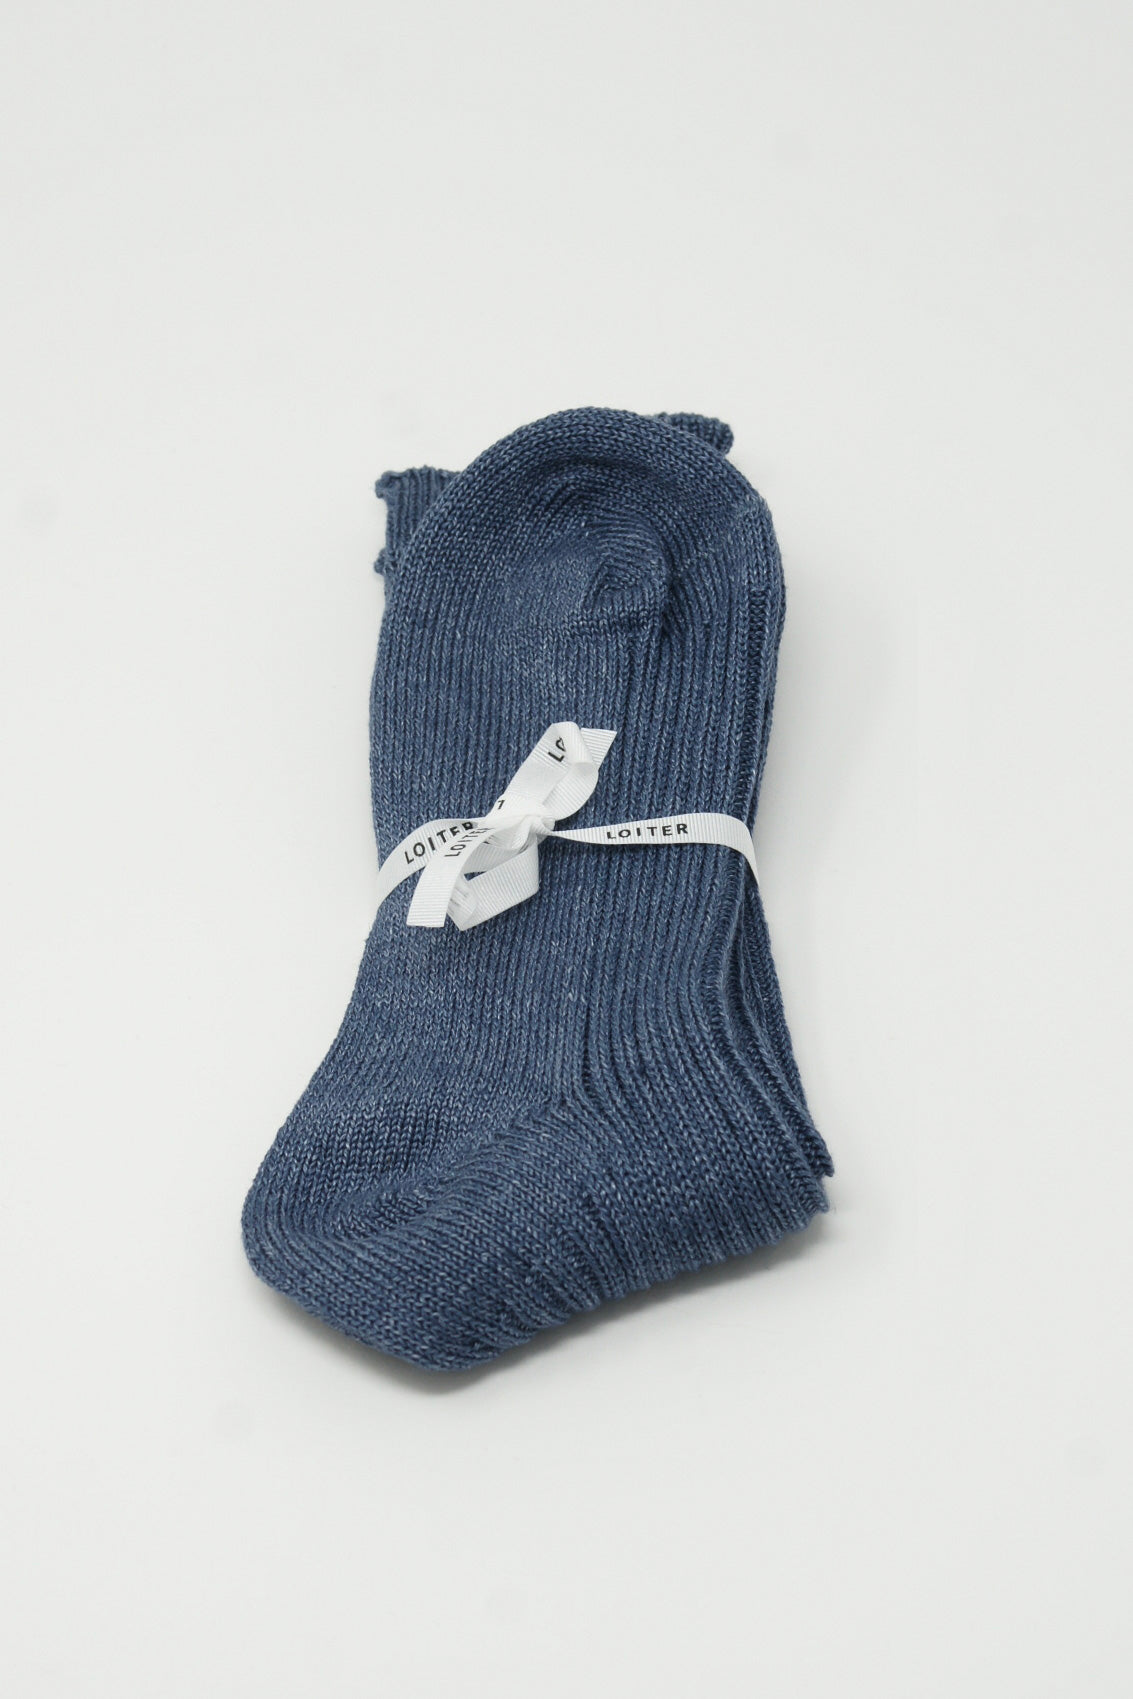 A pair of Linen Rib Socks in Blue by Ichi Antiquités on a white surface.